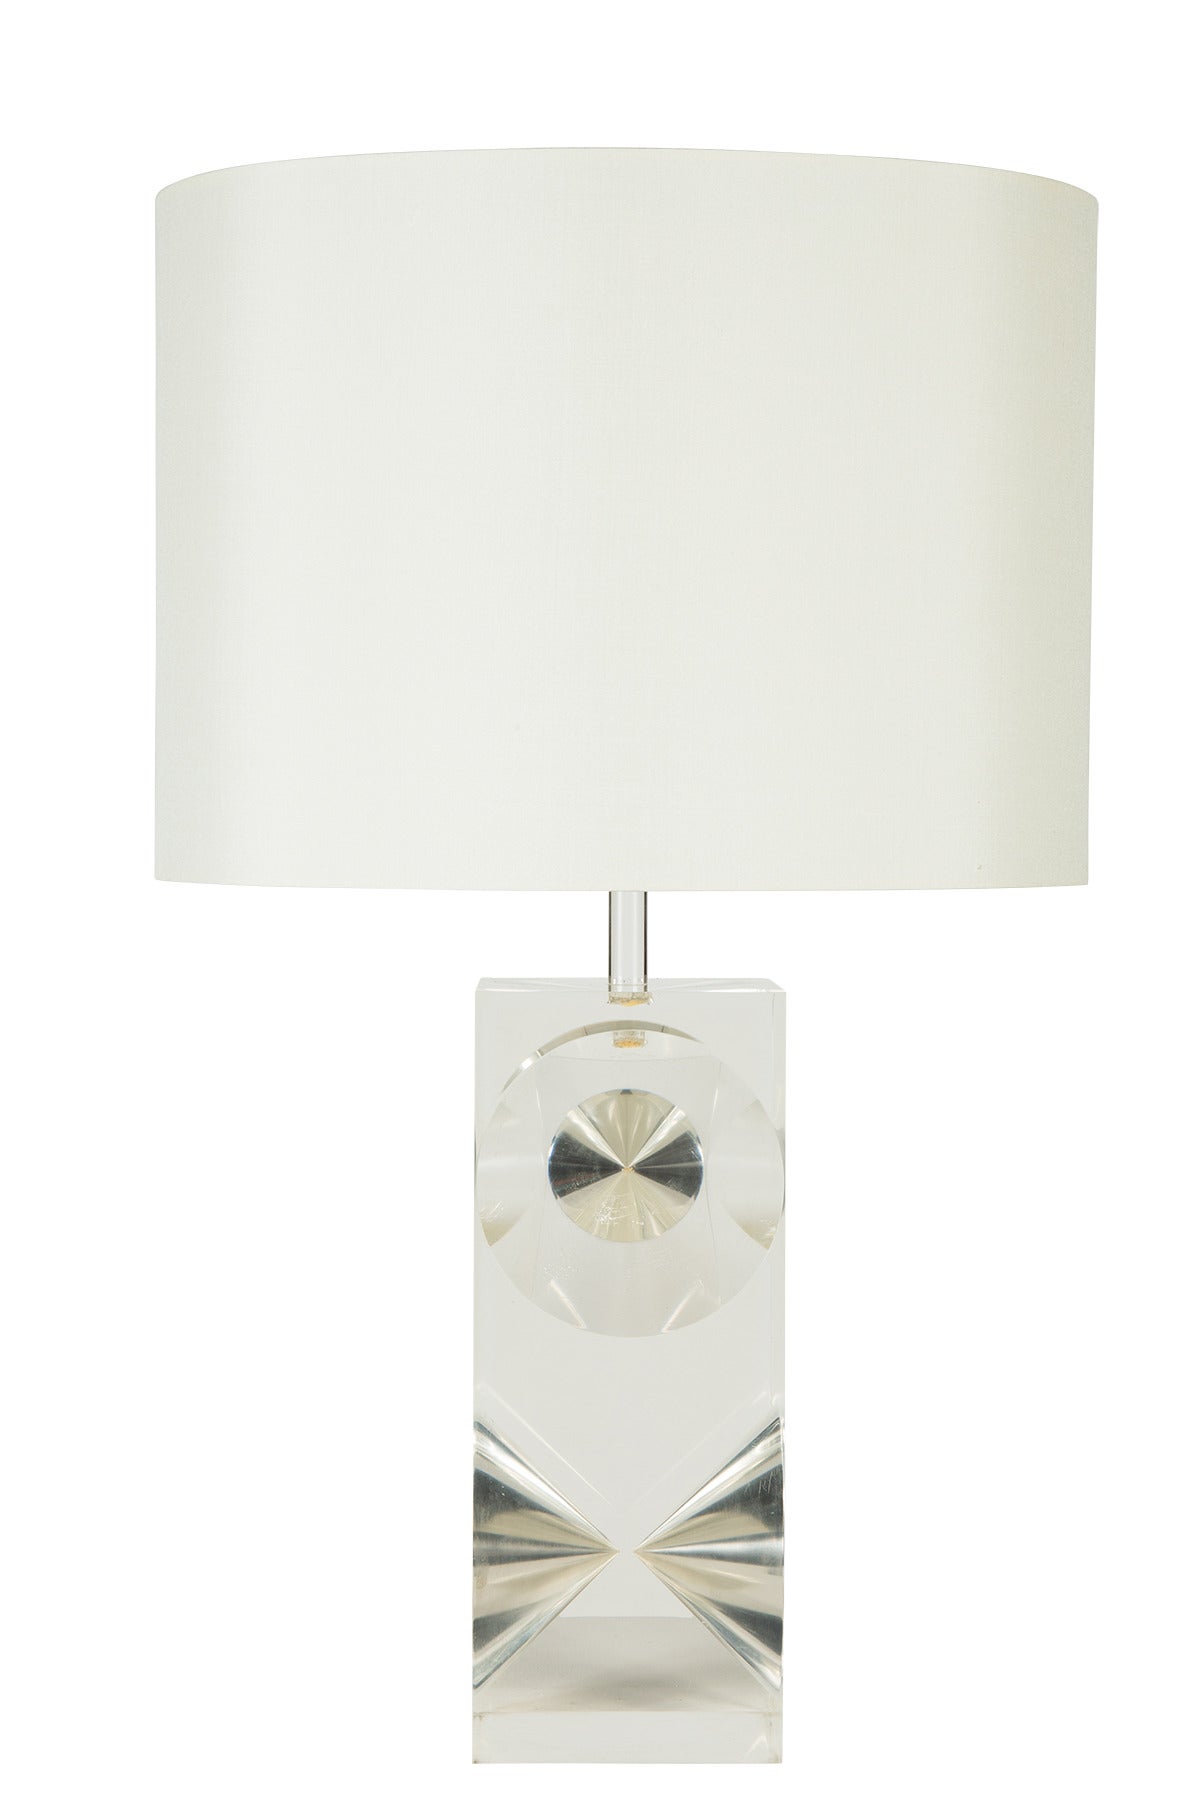 French Sculptural Lucite Table Lamp